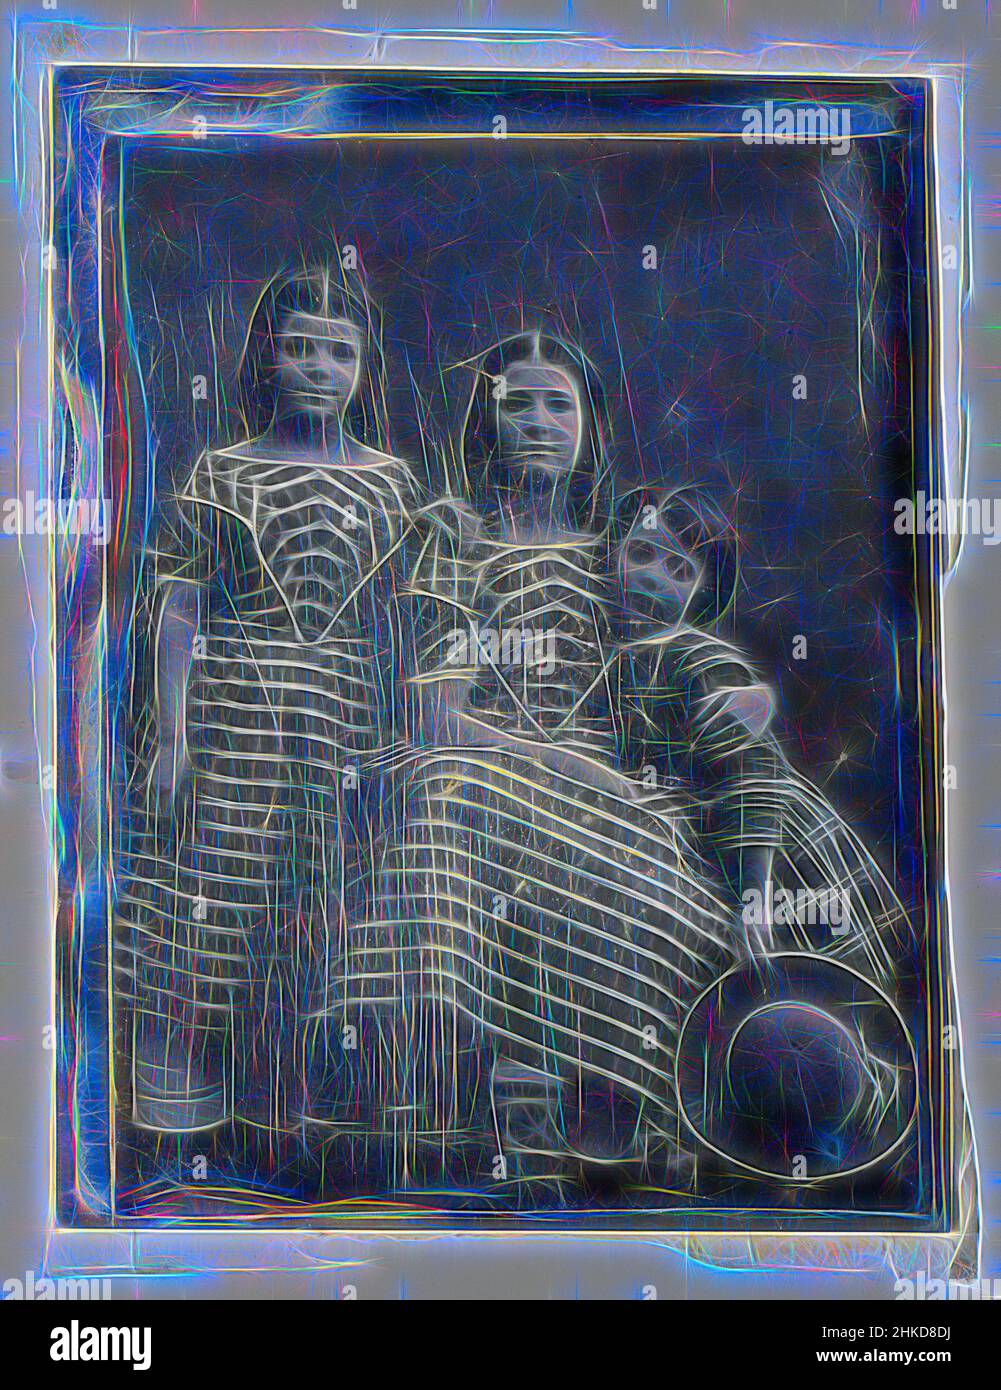 Inspired by Family Portrait of Rosa, Jeanne, and Carel Asser, Eduard Isaac Asser, c. 1850 - c. 1855, copper (metal, Reimagined by Artotop. Classic art reinvented with a modern twist. Design of warm cheerful glowing of brightness and light ray radiance. Photography inspired by surrealism and futurism, embracing dynamic energy of modern technology, movement, speed and revolutionize culture Stock Photo